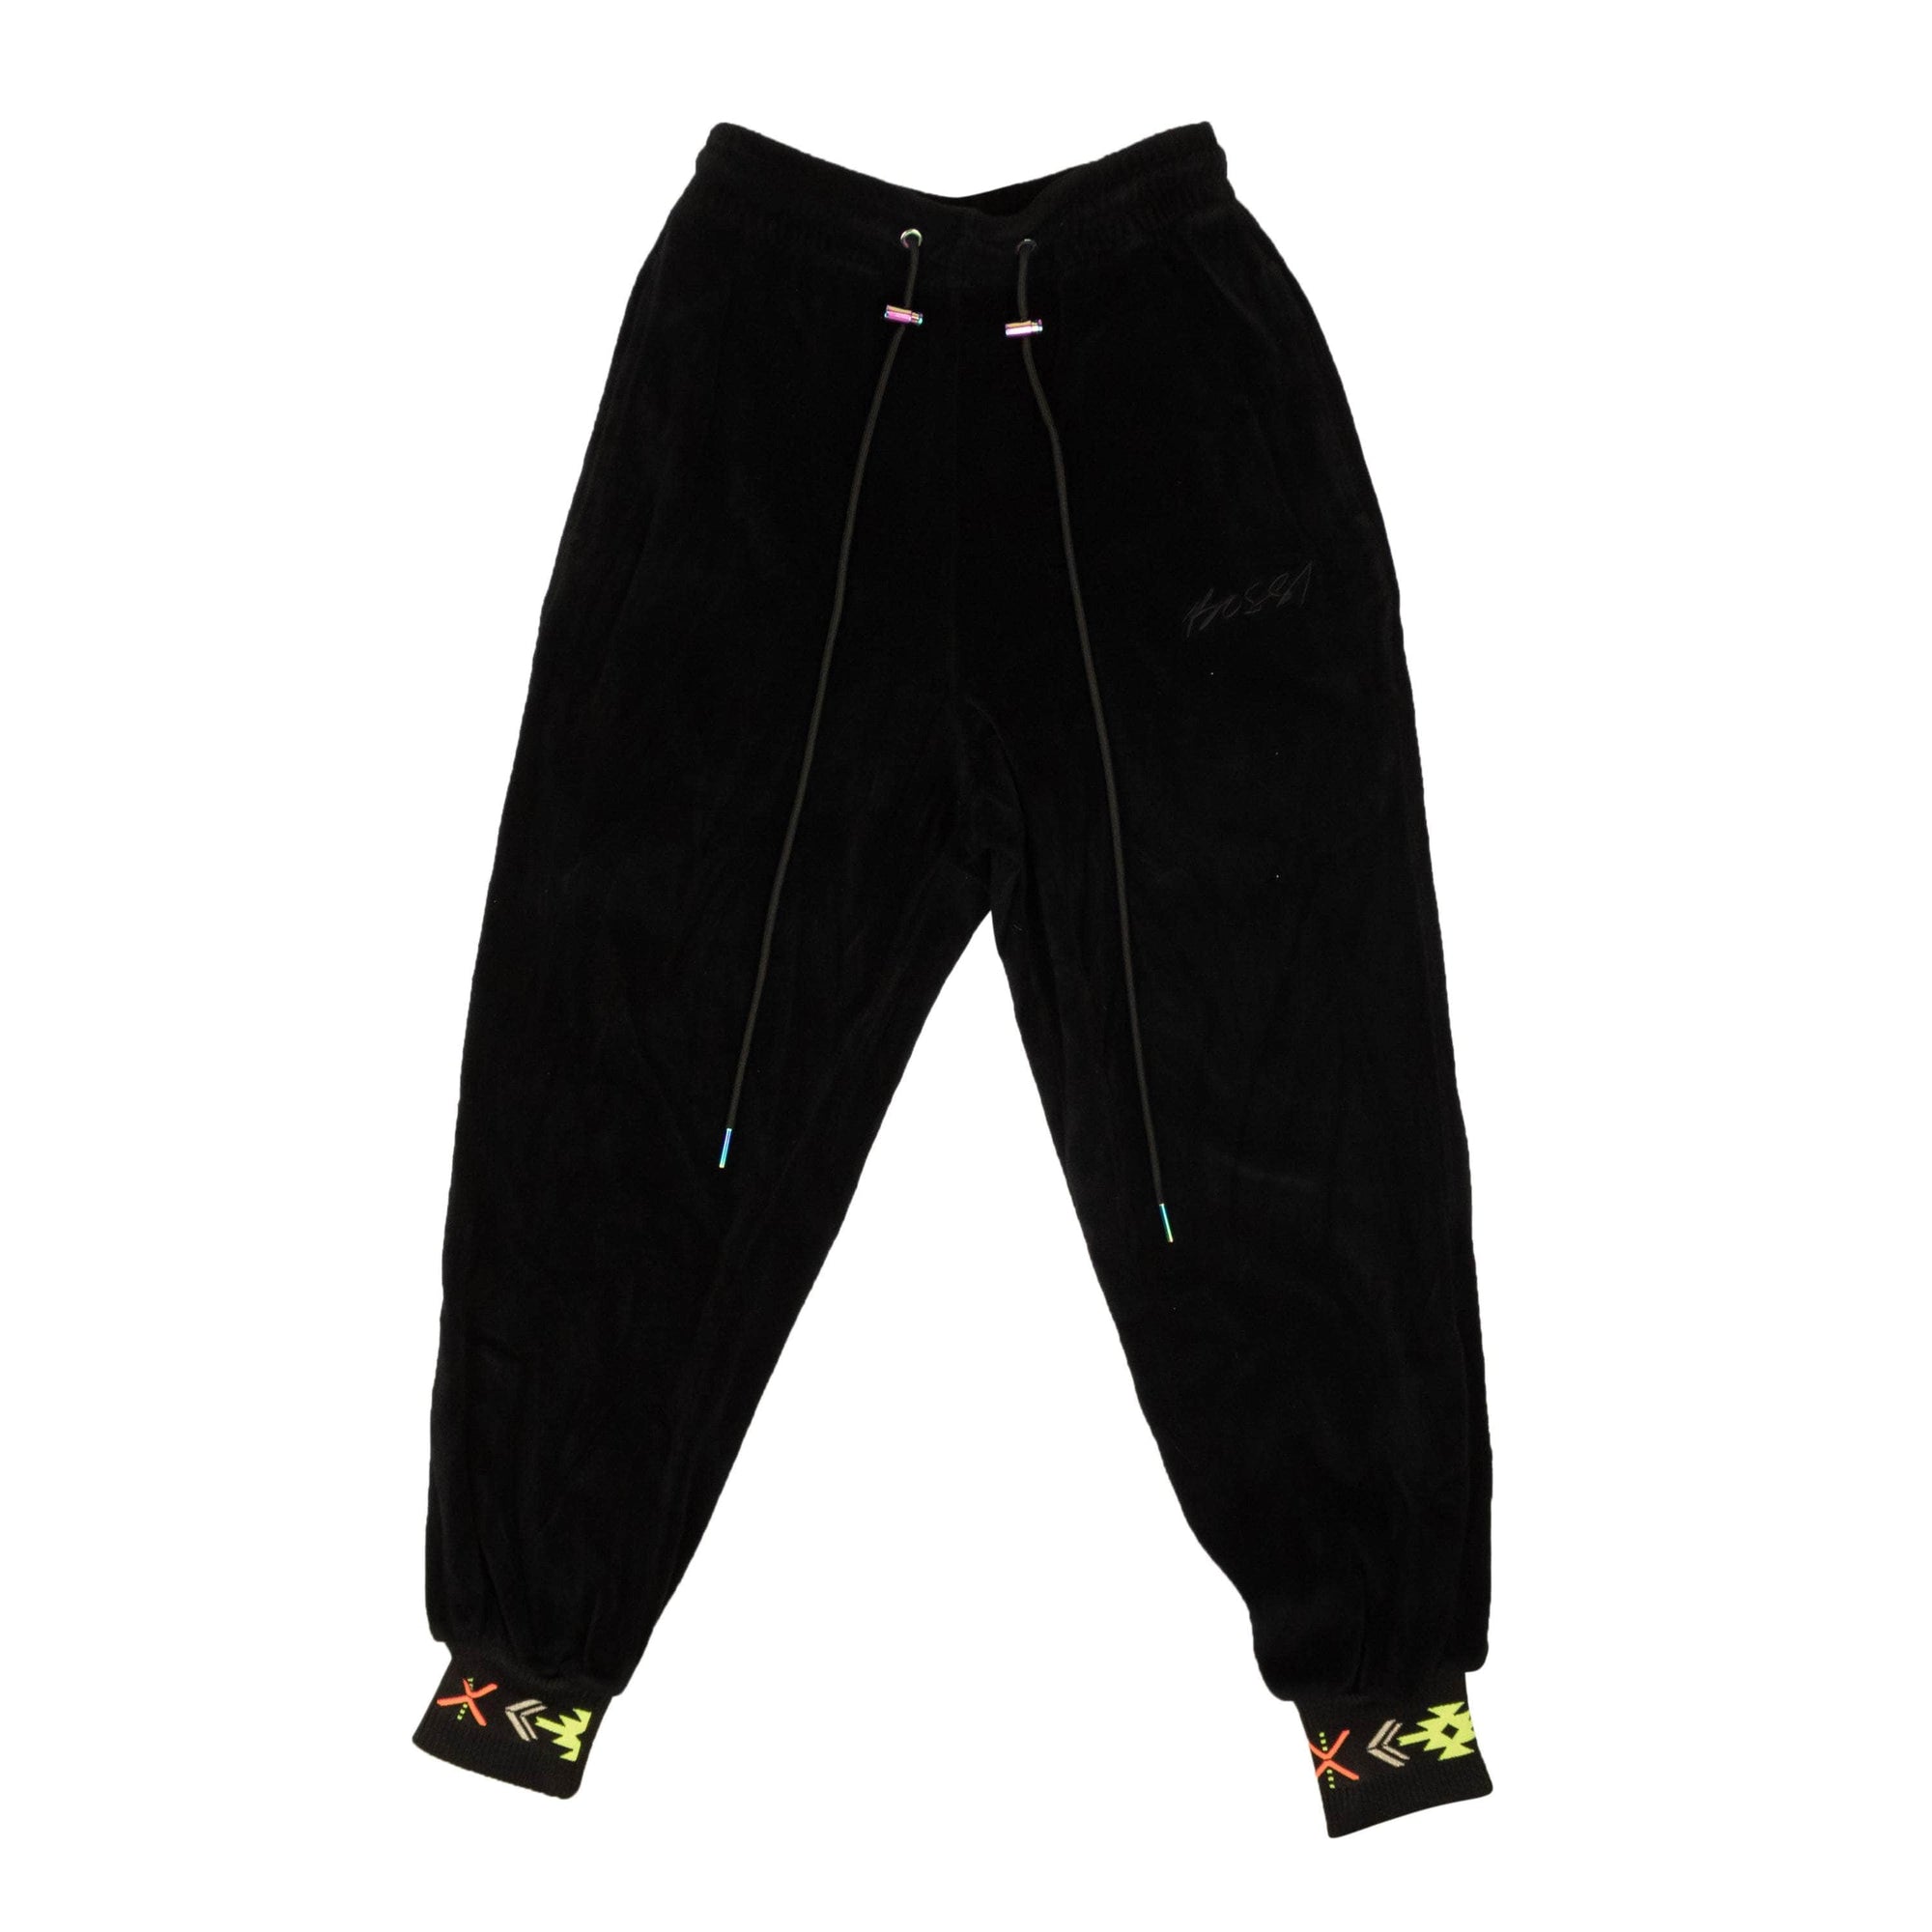 Bossi 250-500, bossi, channelenable-all, chicmi, couponcollection, gender-mens, main-clothing, mens-joggers-sweatpants, mens-shoes, size-s S Black Cotton Velour Embroidered Design Sweatpants BOS-XBTM-0010/S BOS-XBTM-0010/S